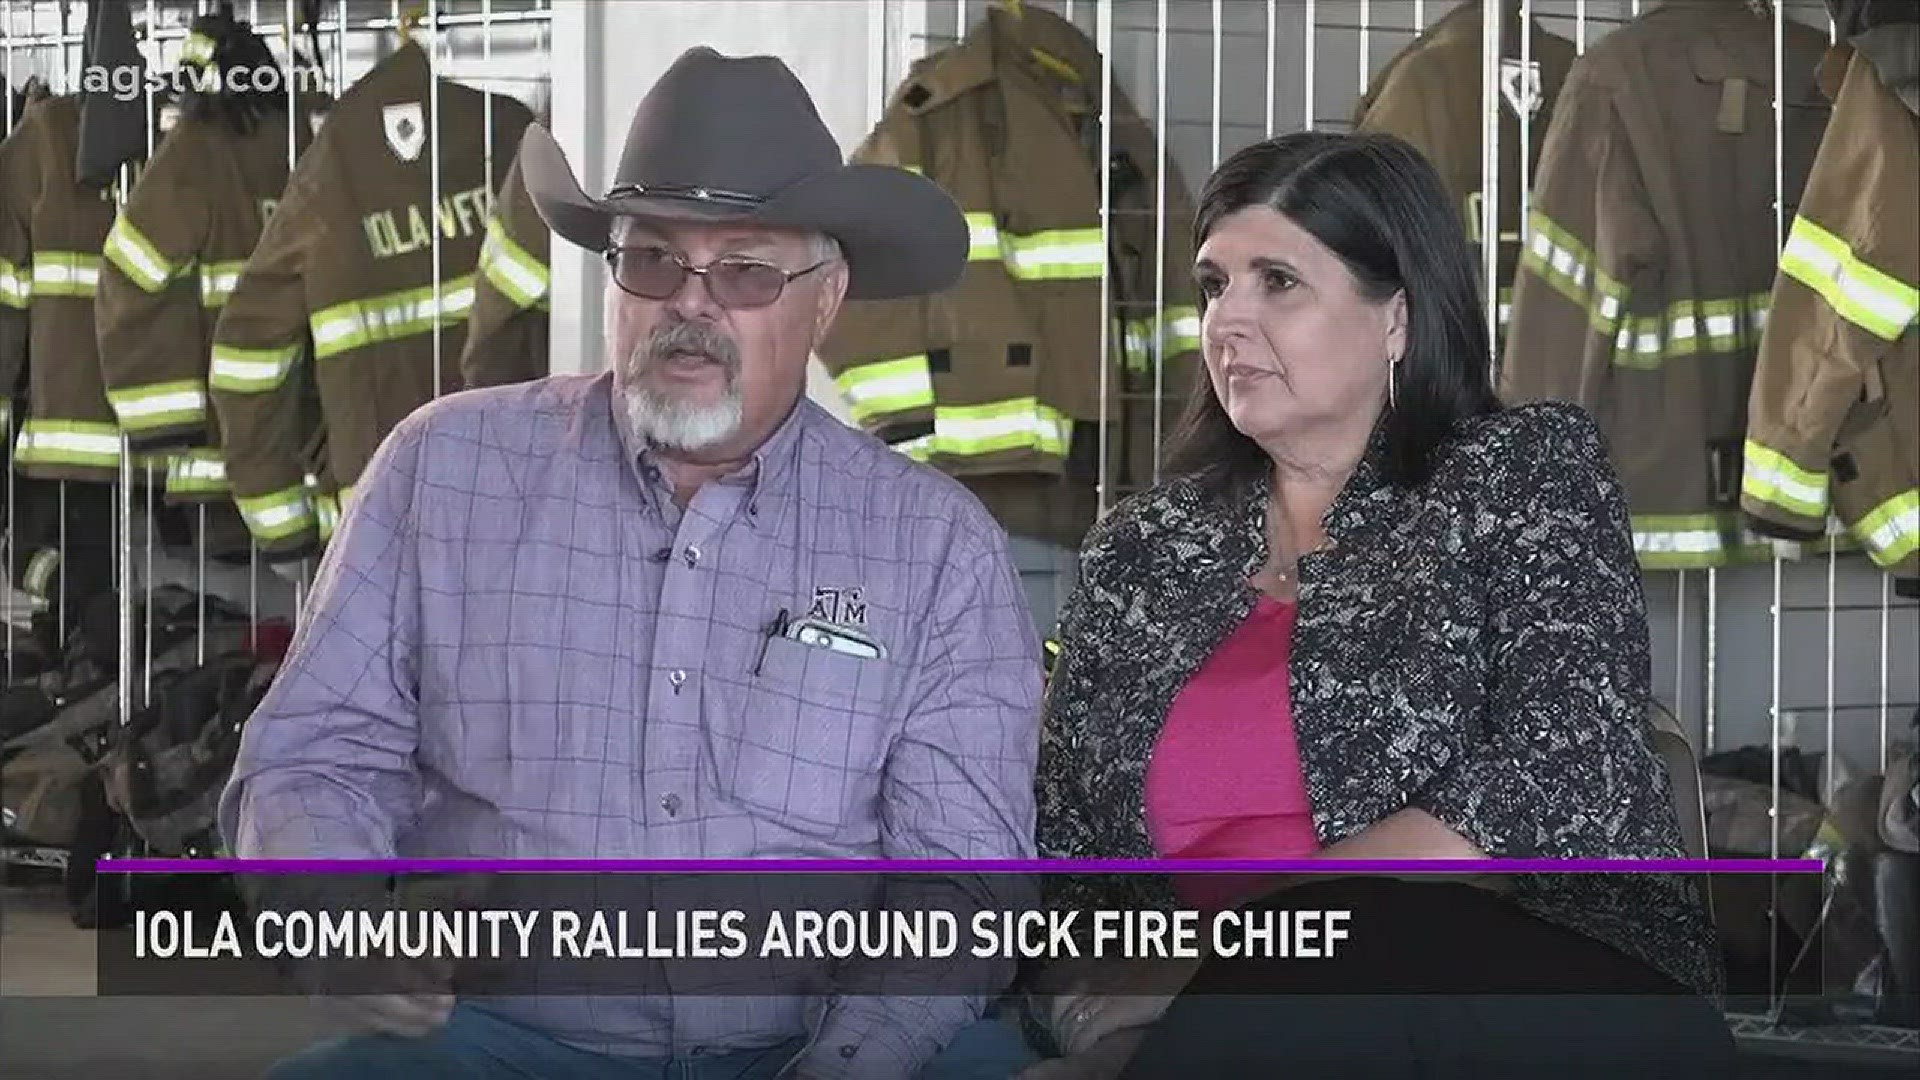 A small community in Grimes county has rallied around a volunteer fire chief with Cancer. Jay O'Brien speaks with him and his wife.